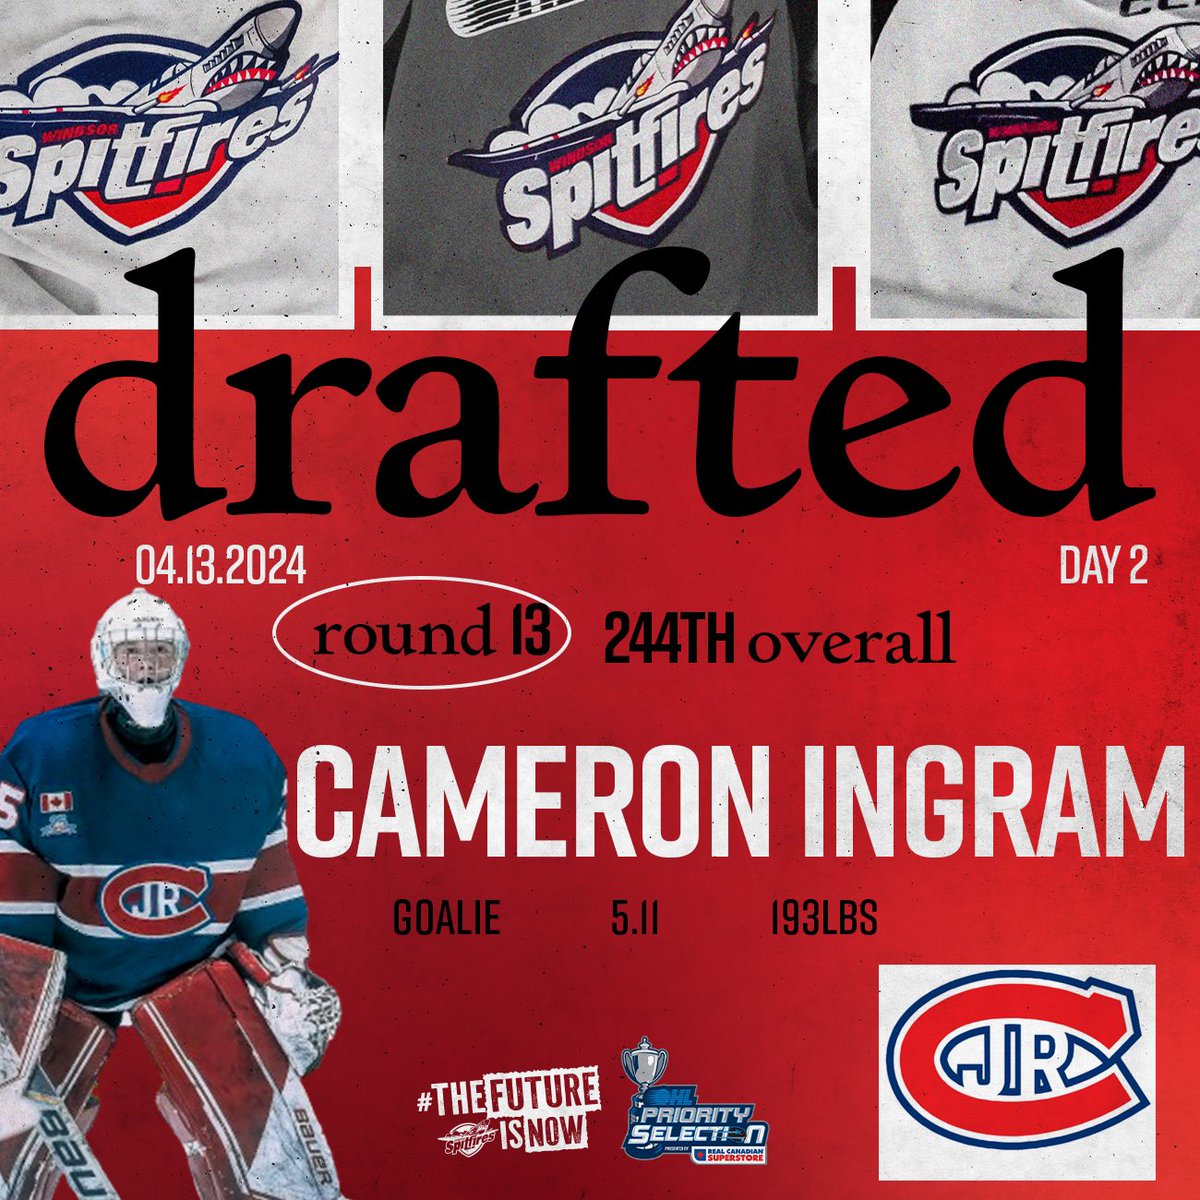 With the 244th overall pick in the 2024 OHL Priority Selection, the Windsor Spitfires are proud to select Cameron Ingram from the Toronto Jr Canadiens team! #WindsorSpitfires #OHLDraft